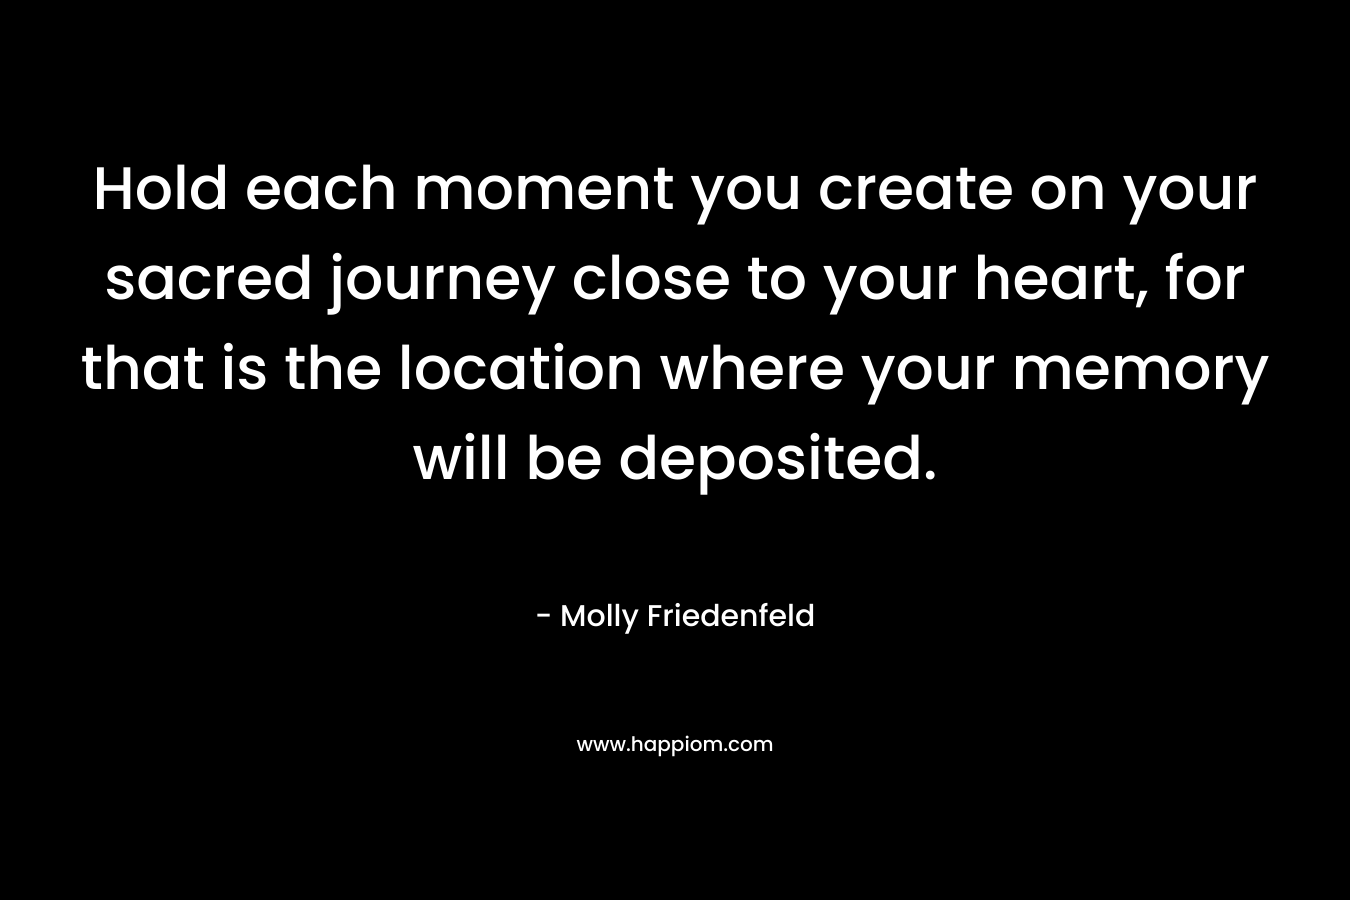 Hold each moment you create on your sacred journey close to your heart, for that is the location where your memory will be deposited.